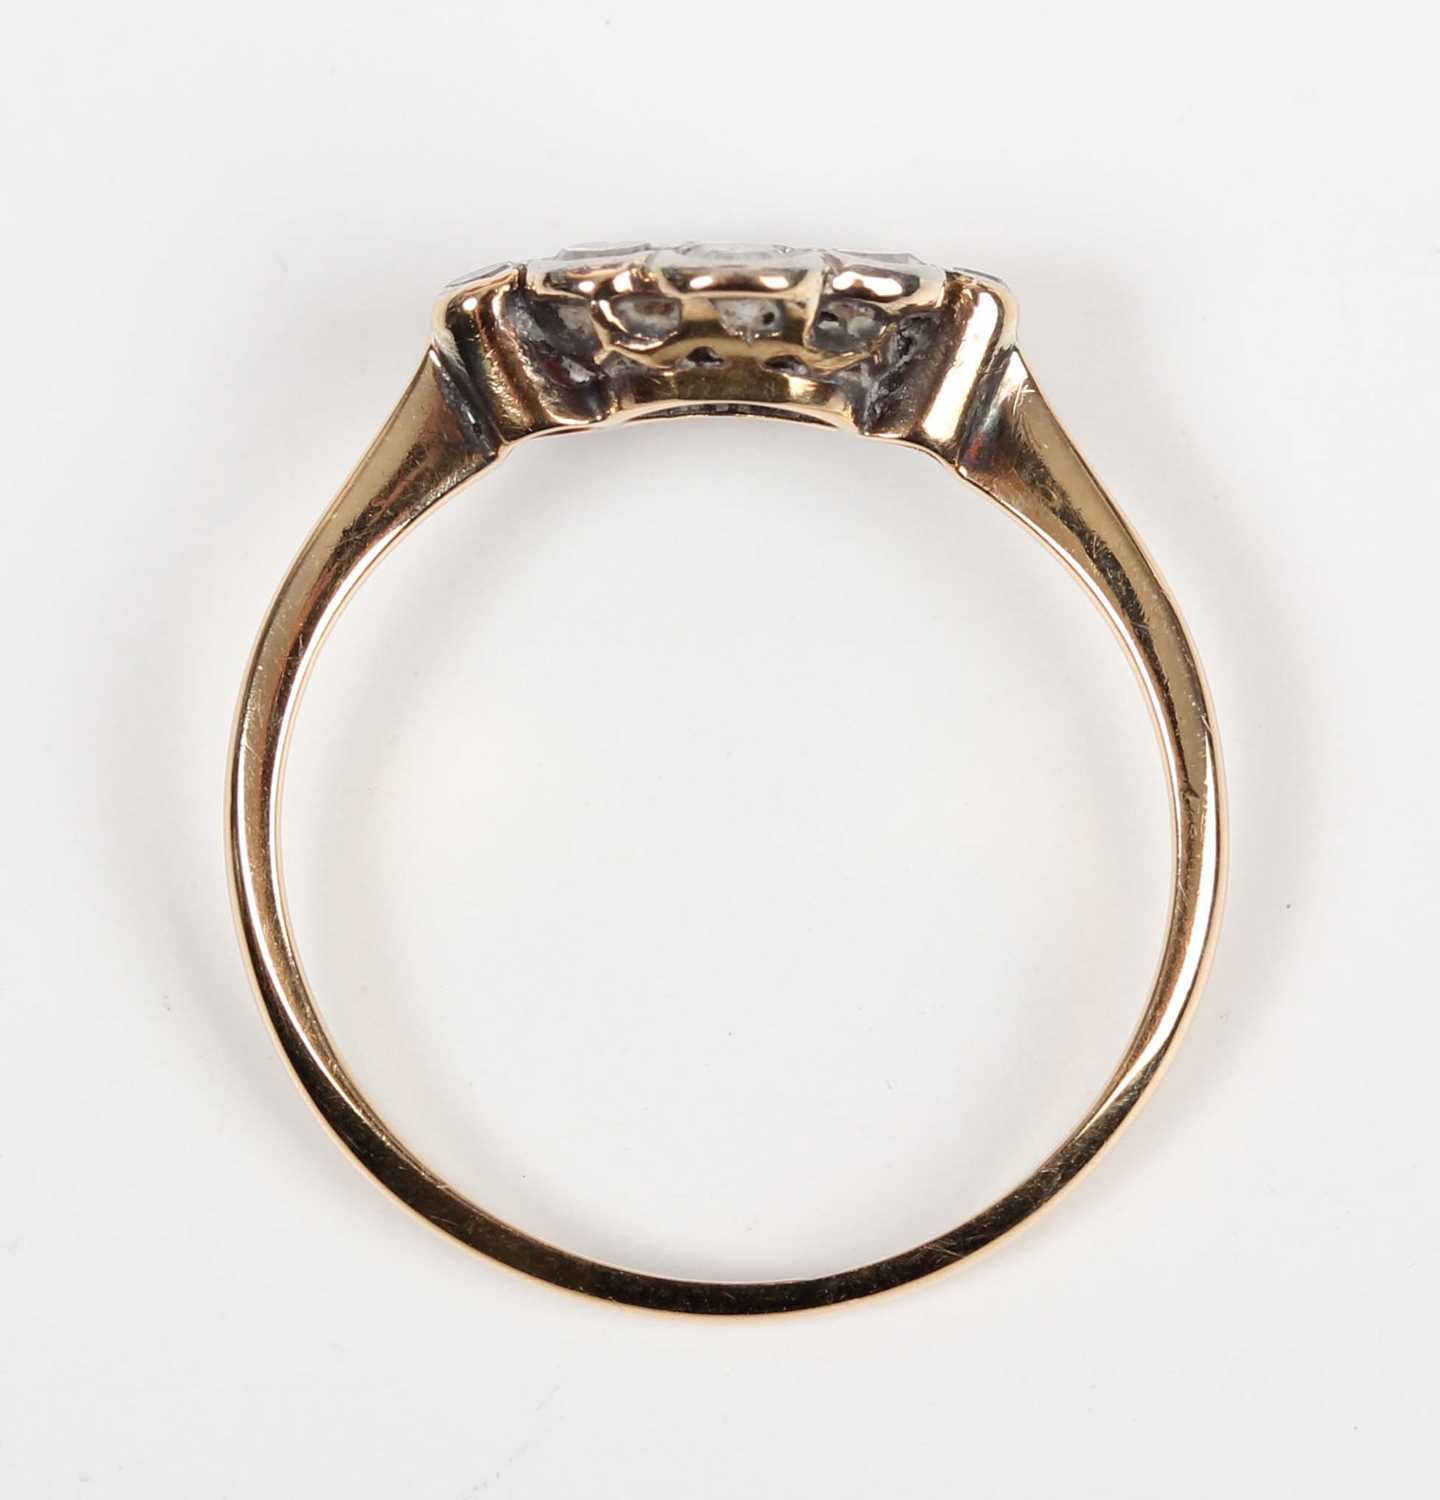 A gold, platinum and diamond nine stone cluster ring in a lozenge shaped design, mounted with - Image 4 of 5